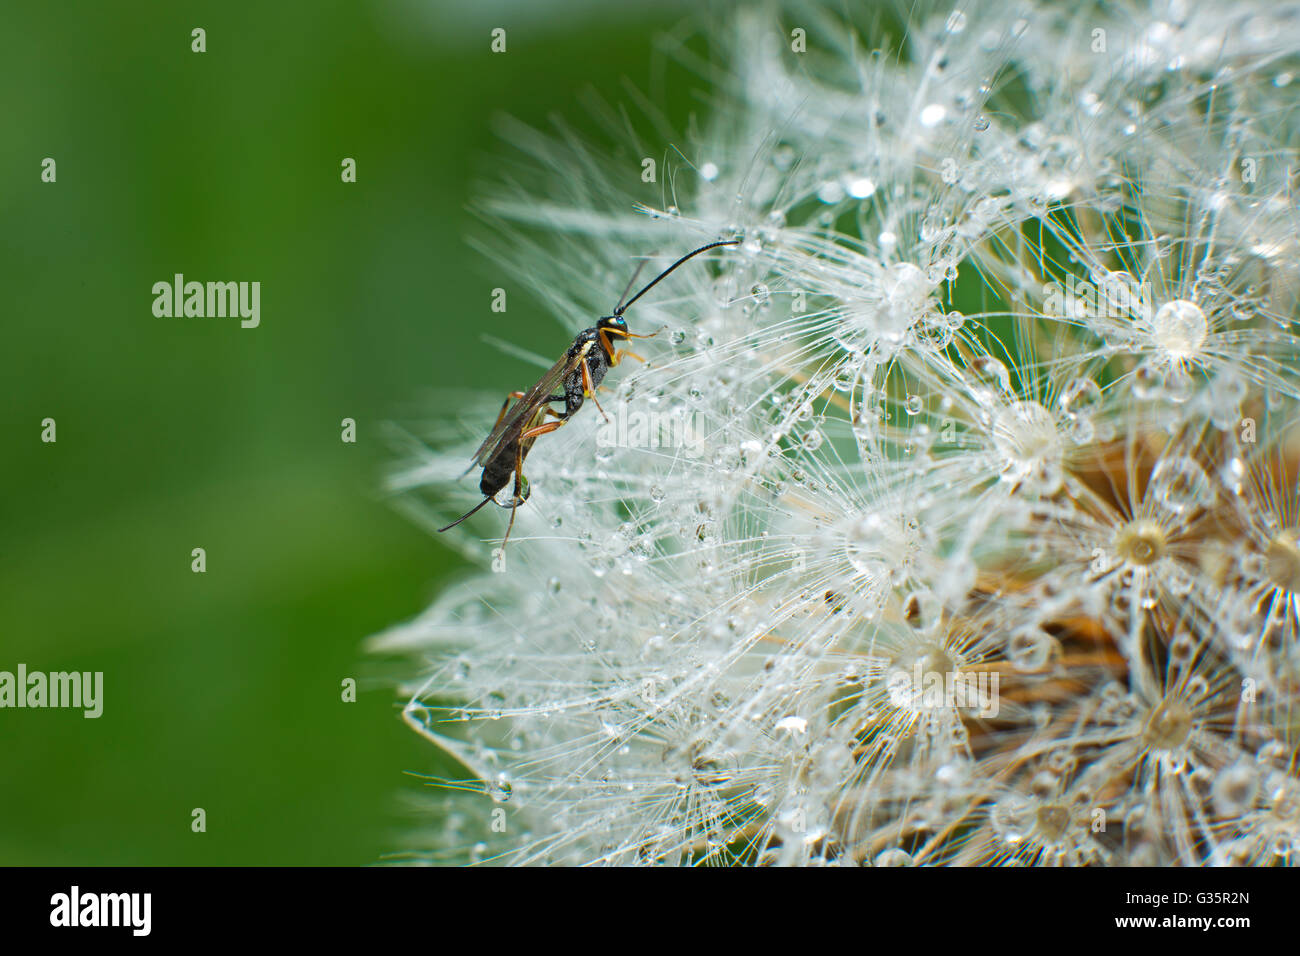 insect on dandelion seed head Stock Photo